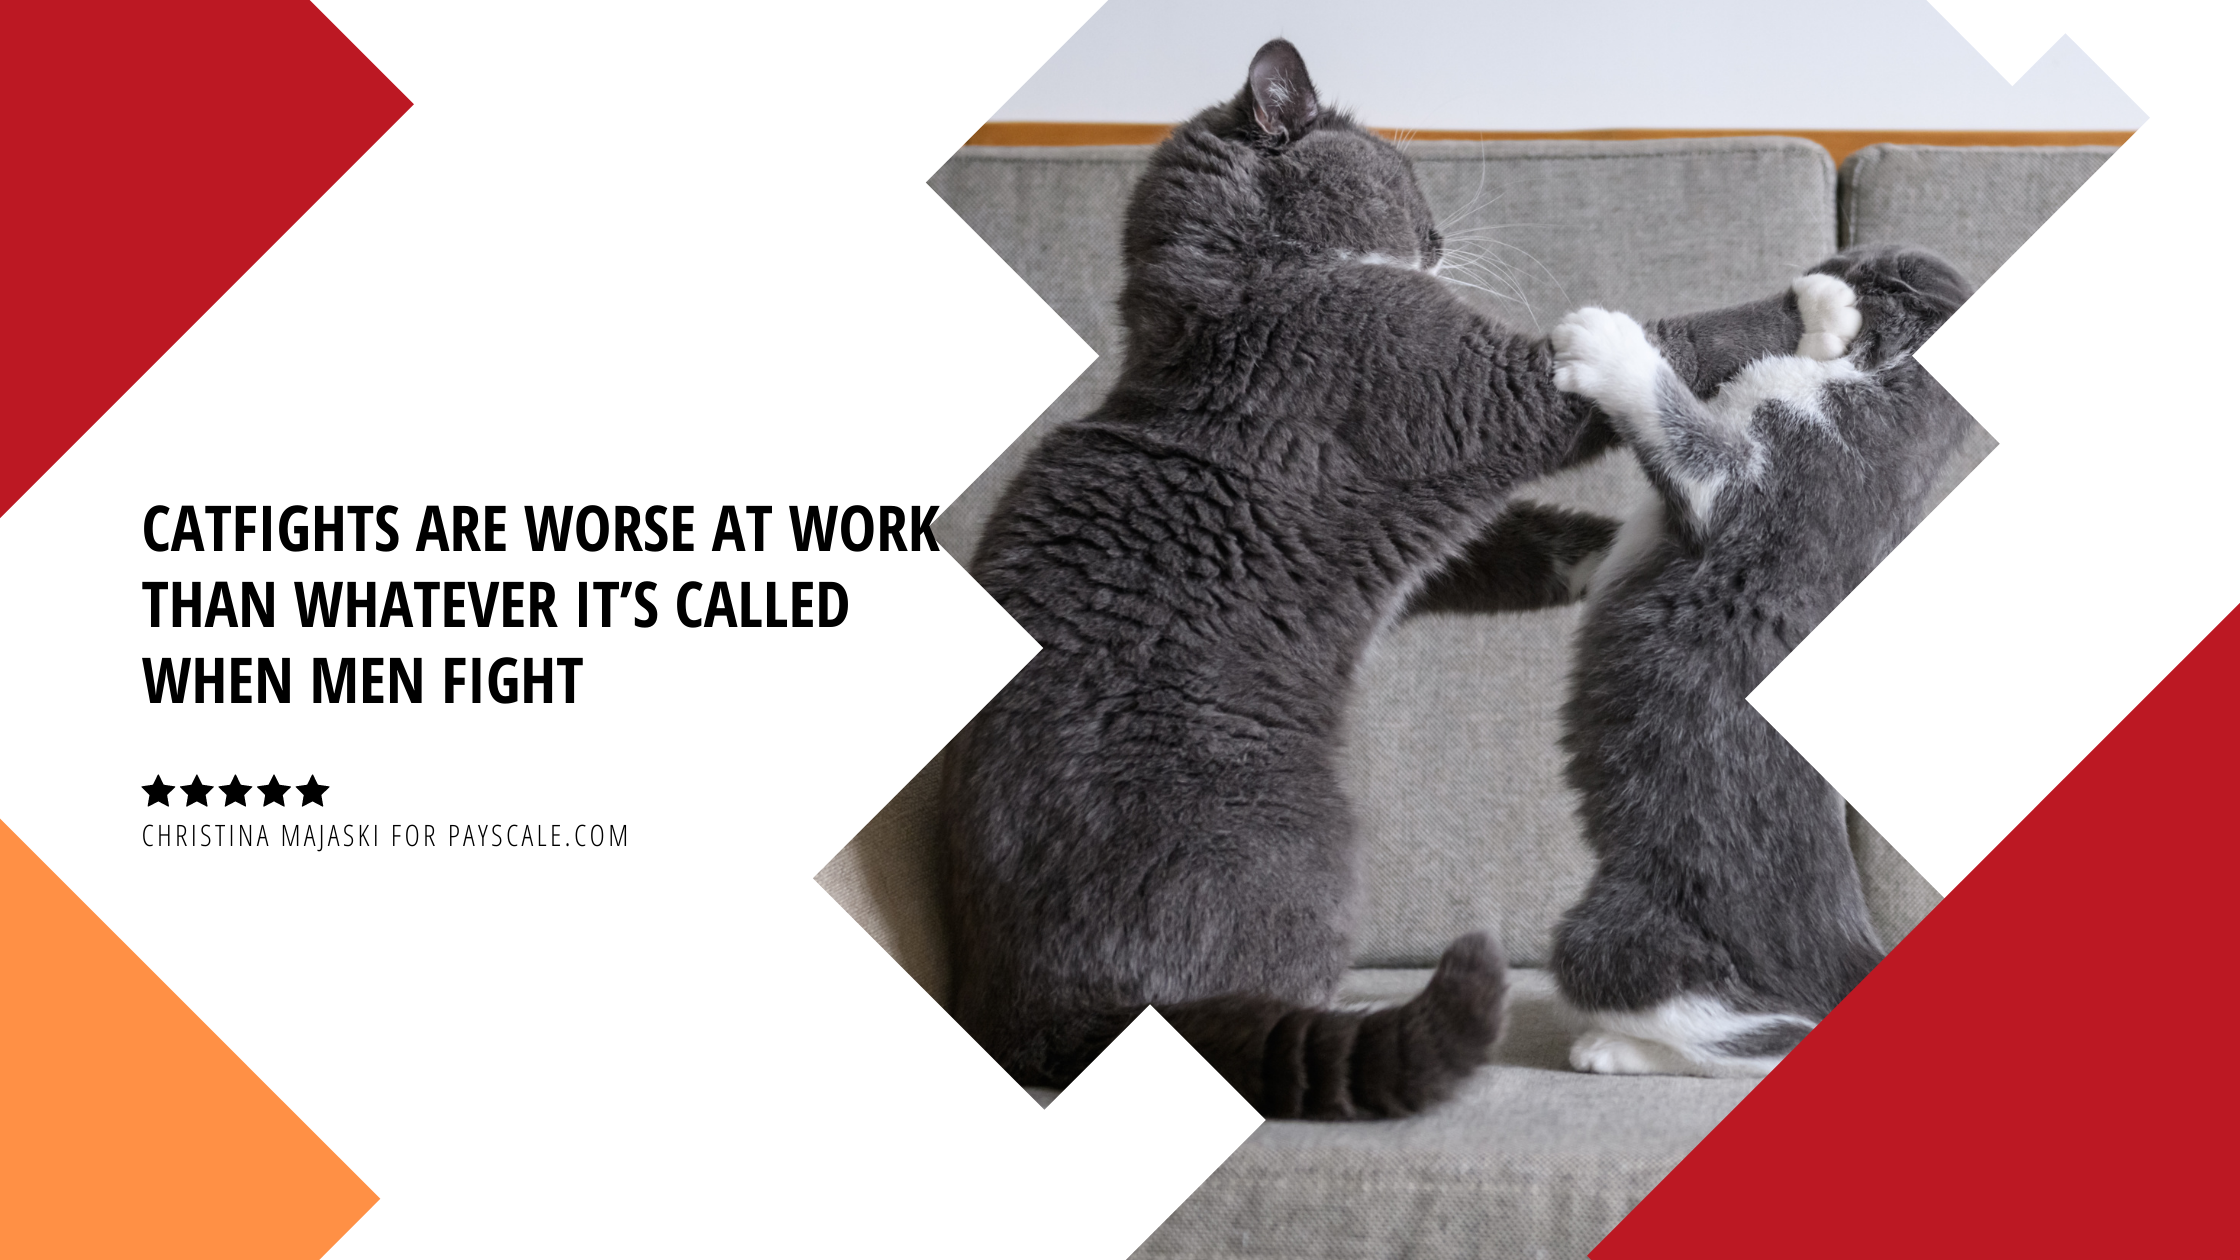 CATFIGHTS ARE WORSE AT WORK THAN WHATEVER IT’S CALLED WHEN MEN FIGHT